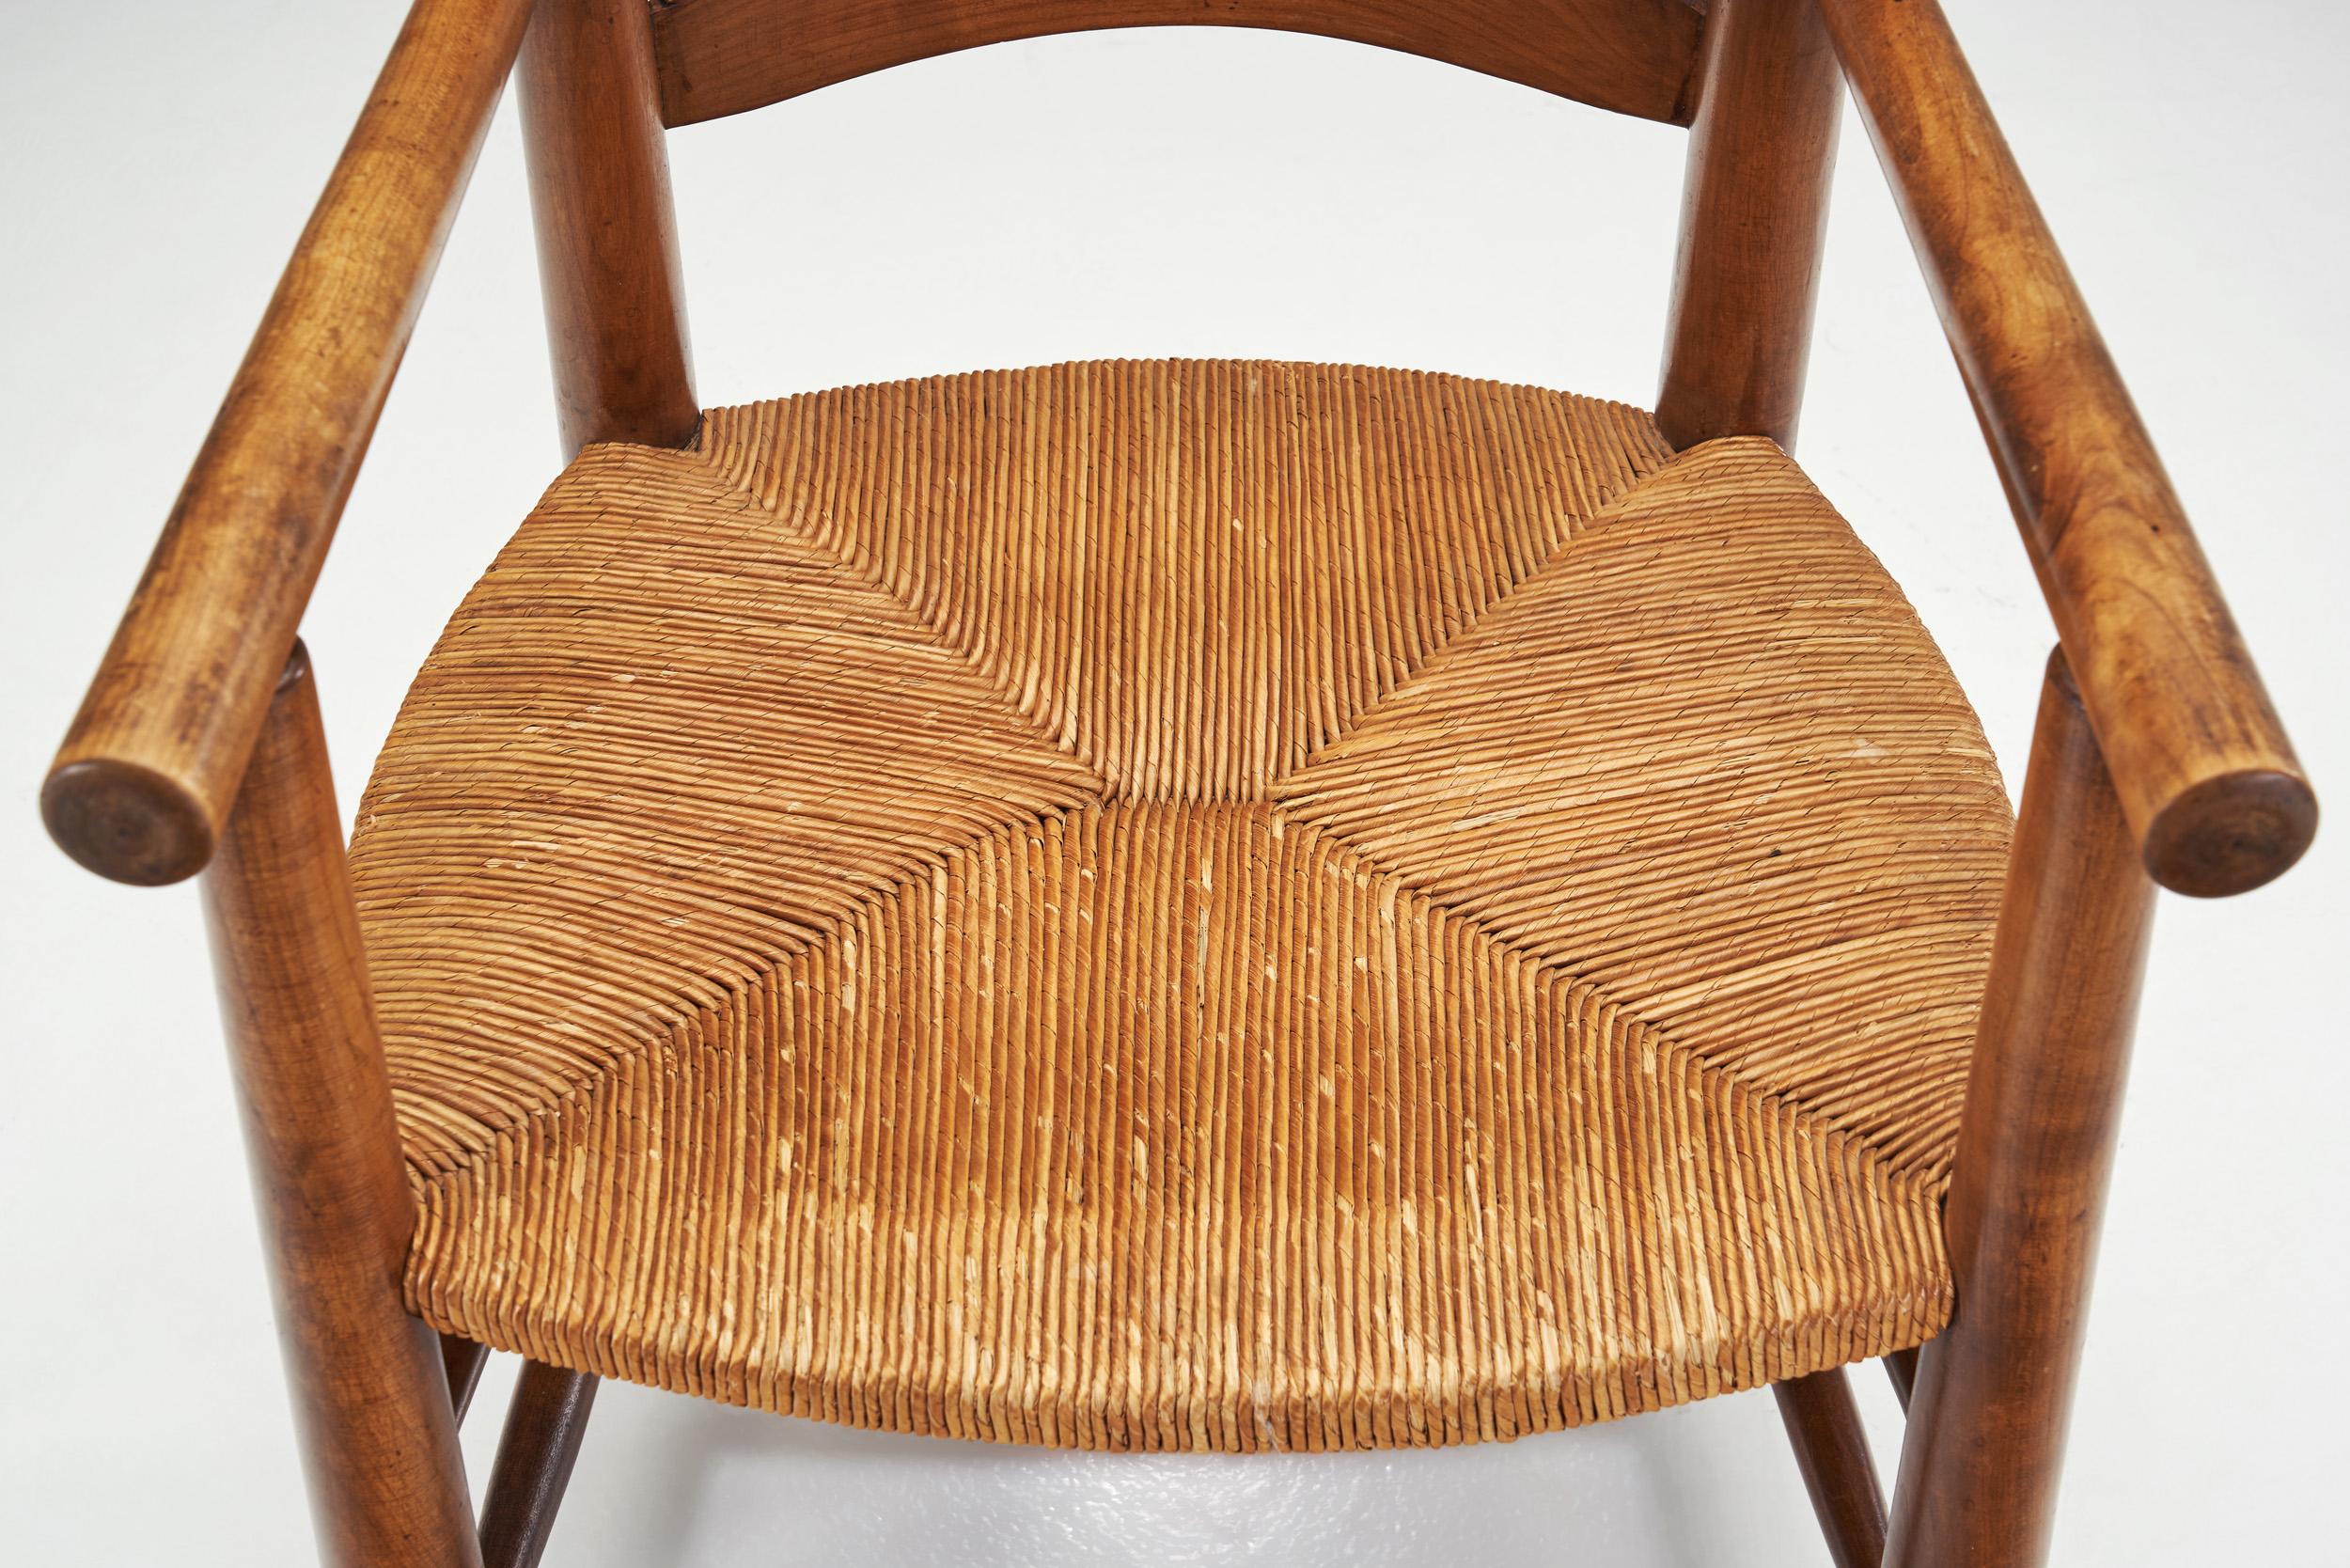 French Oak Armchairs with Woven Rush Seat, France 1950s For Sale 3